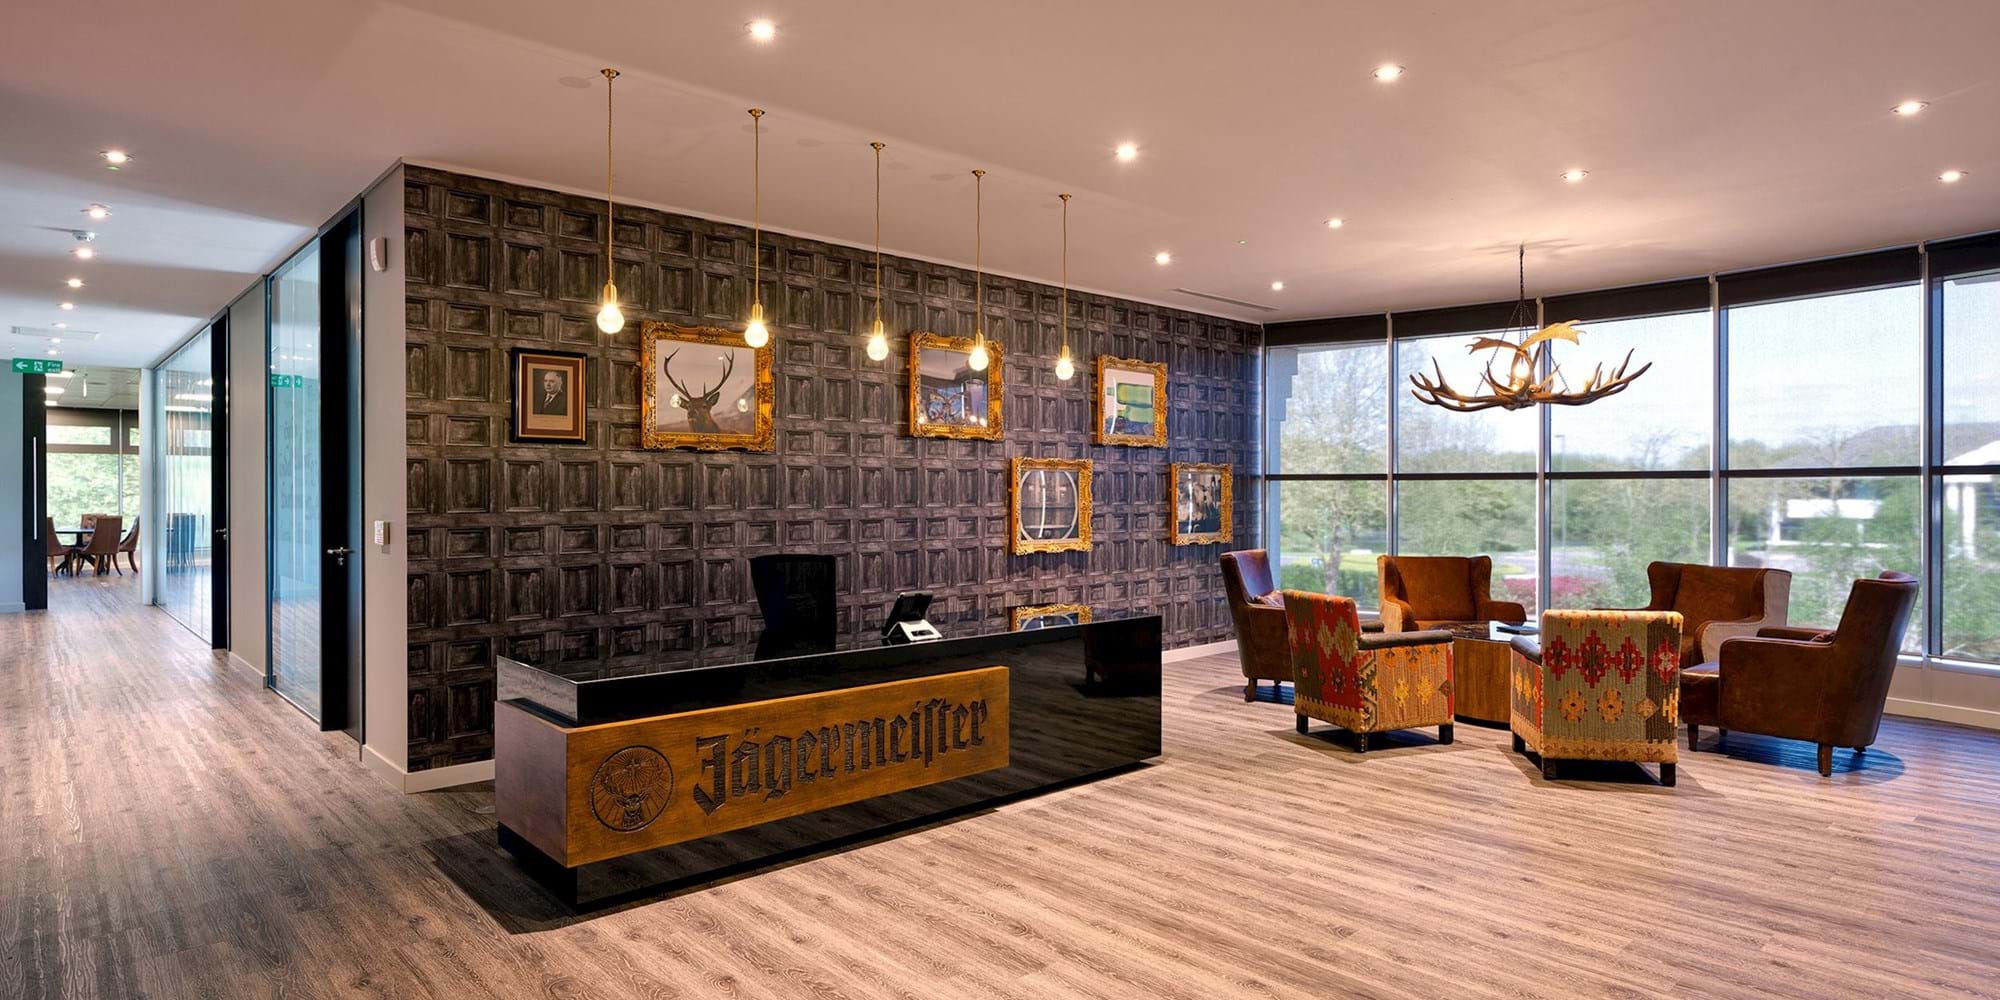 Modus Workspace office design, fit out and refurbishment - Jagermeister - Reception - Jagermeister 01 d highres sRGB.jpg